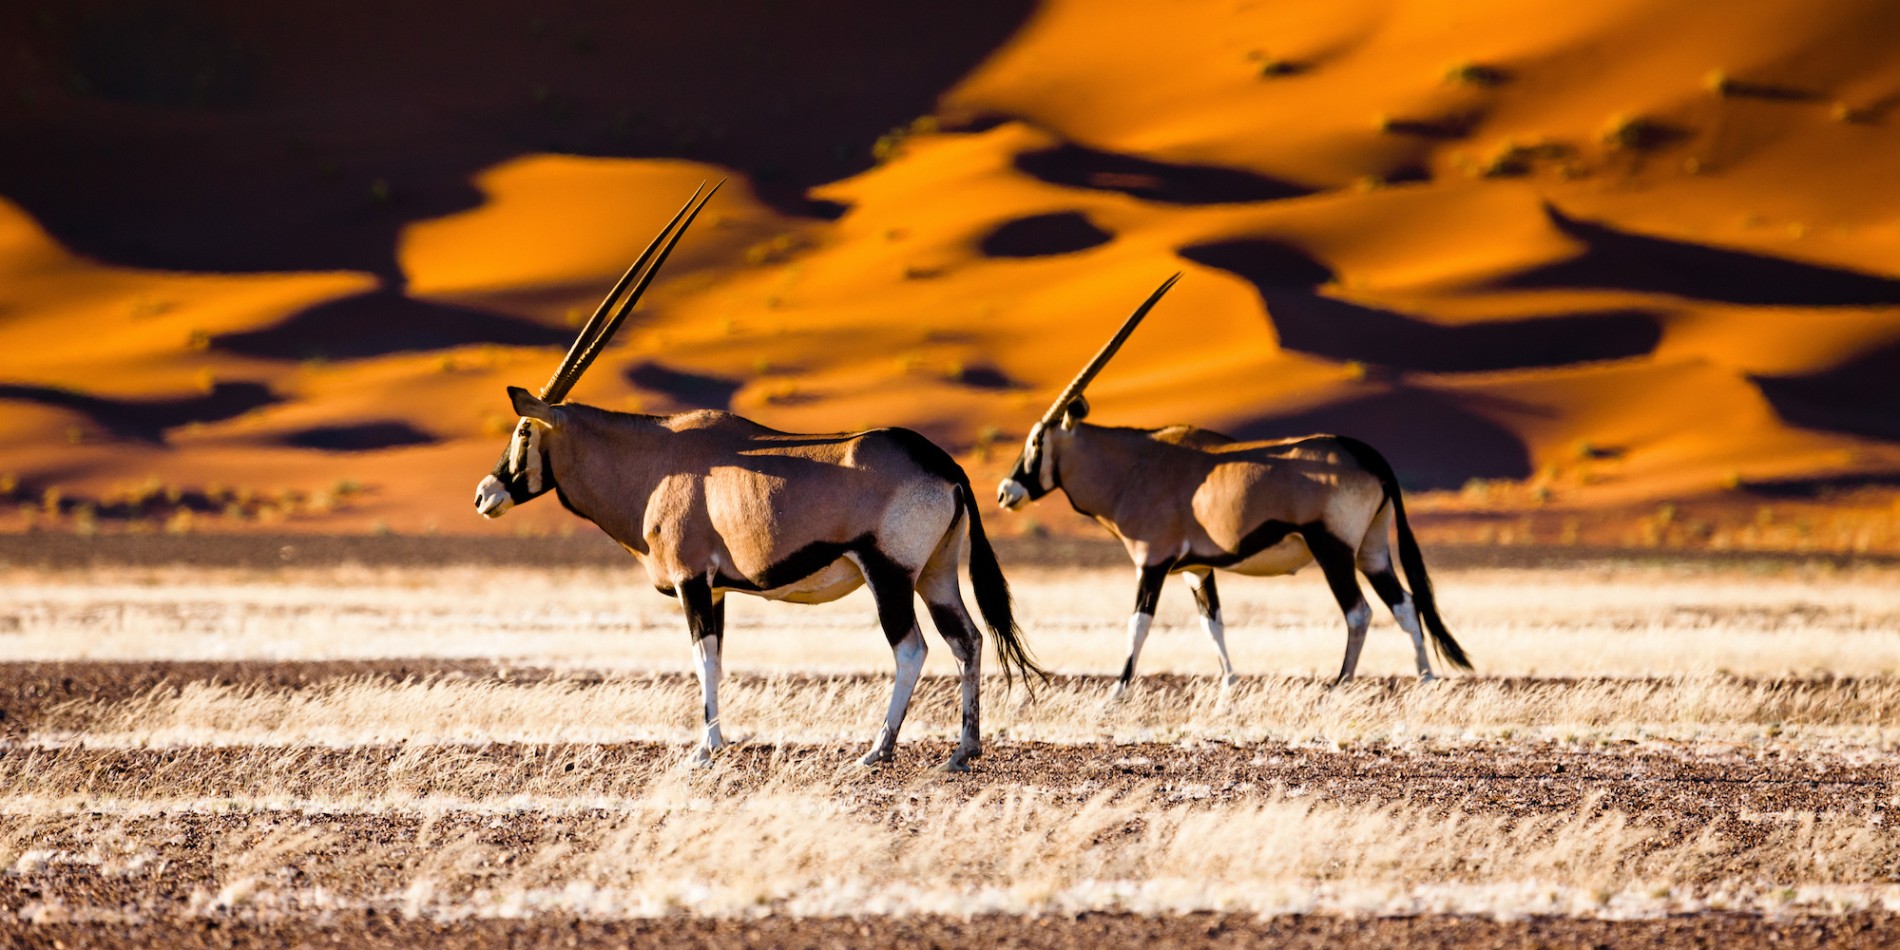 Group of oryz or gazelles walking through desert grass in front of sand dunes in Namibia